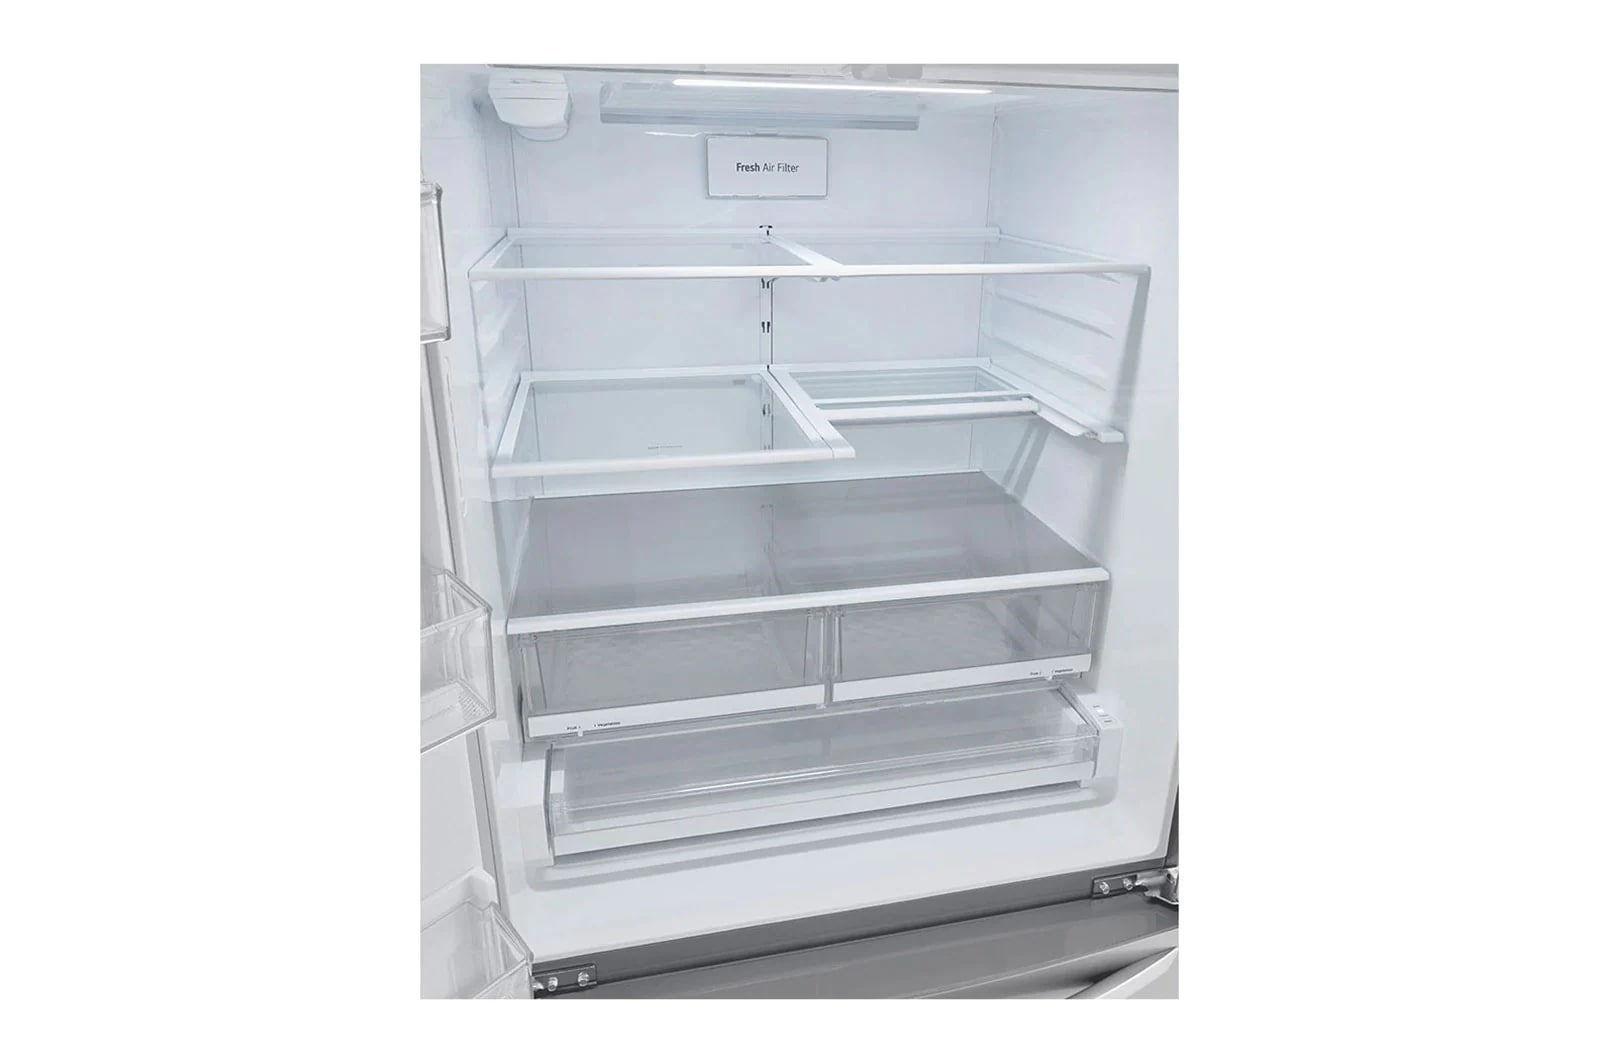 LG - 35.75 Inch 22 cu. ft French Door Refrigerator in Stainless - LRMXC2206S